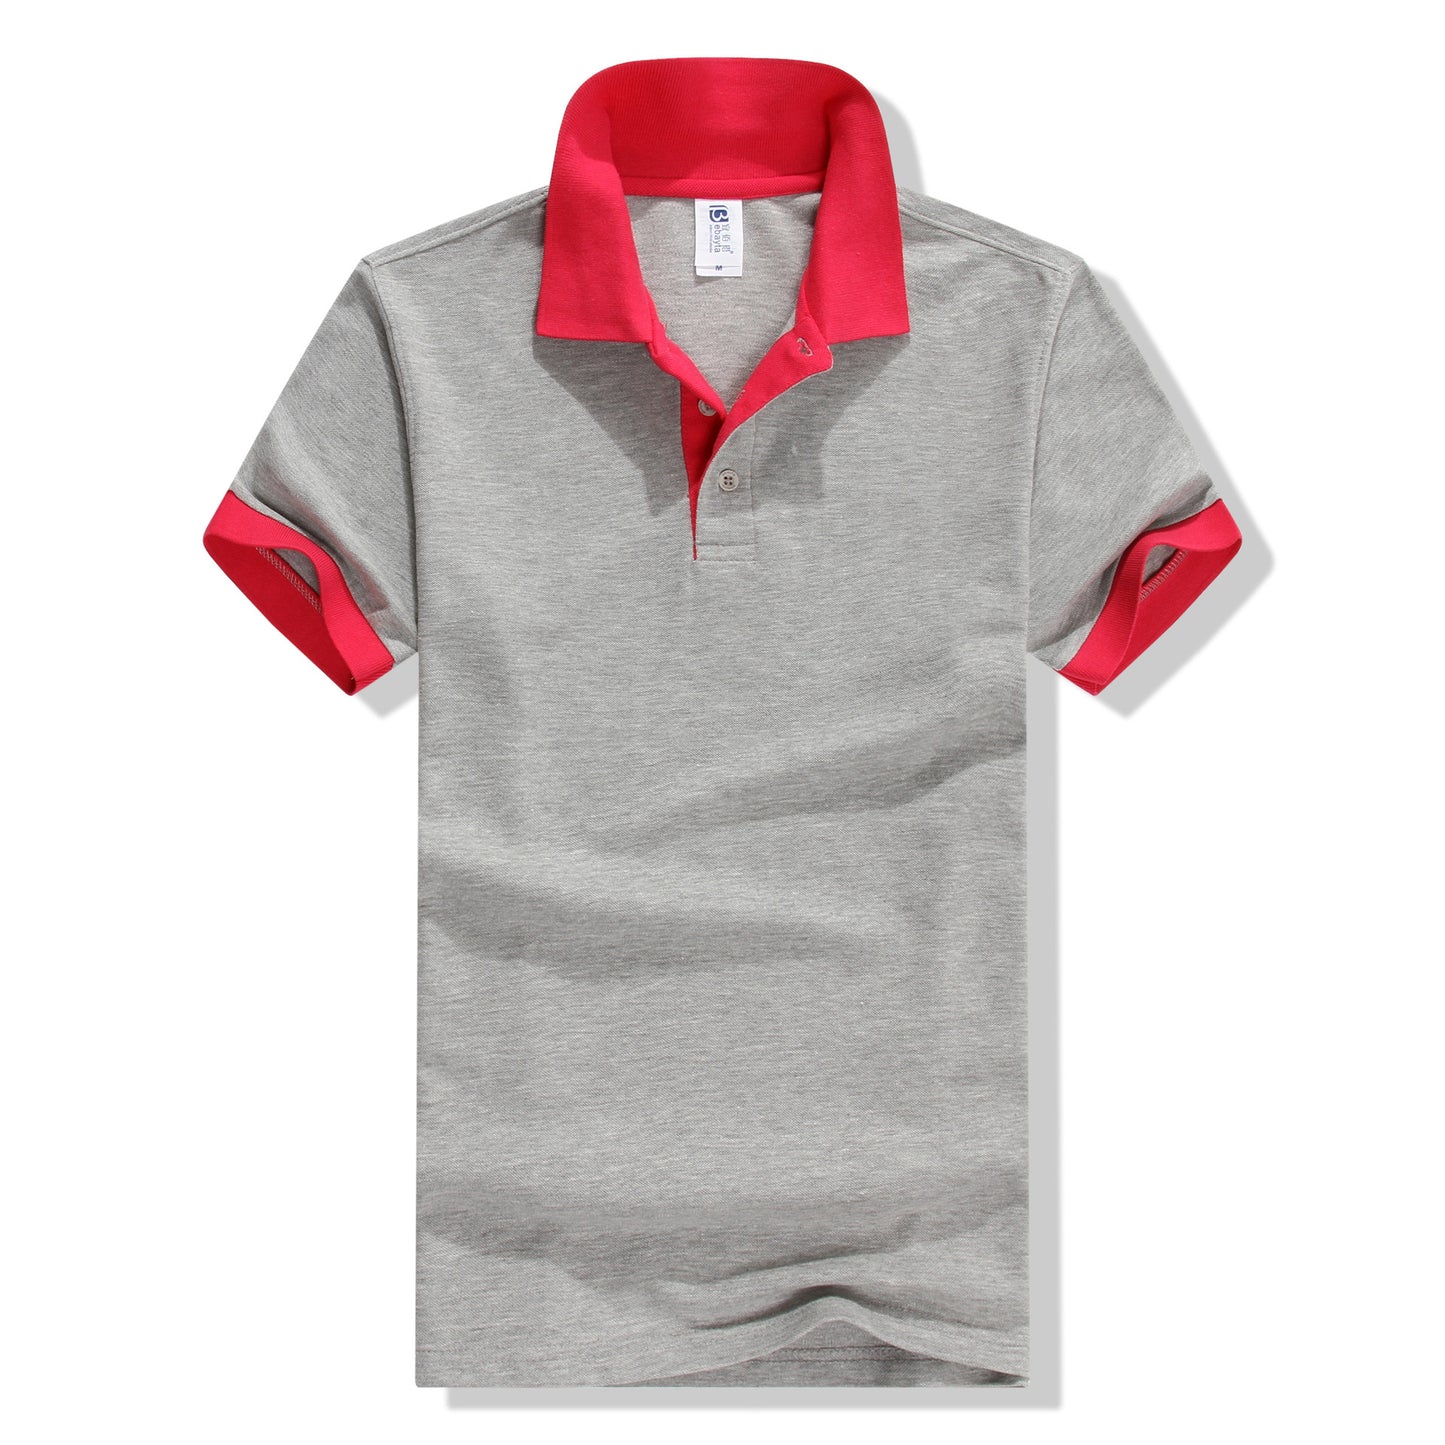 Custom LOGO/Pattern 195g 65% Cotton + 35% Polyester Two Buttons Business EUR Size Polo-shirts For Men and Women (Instock) CST-072 TBB-D-M